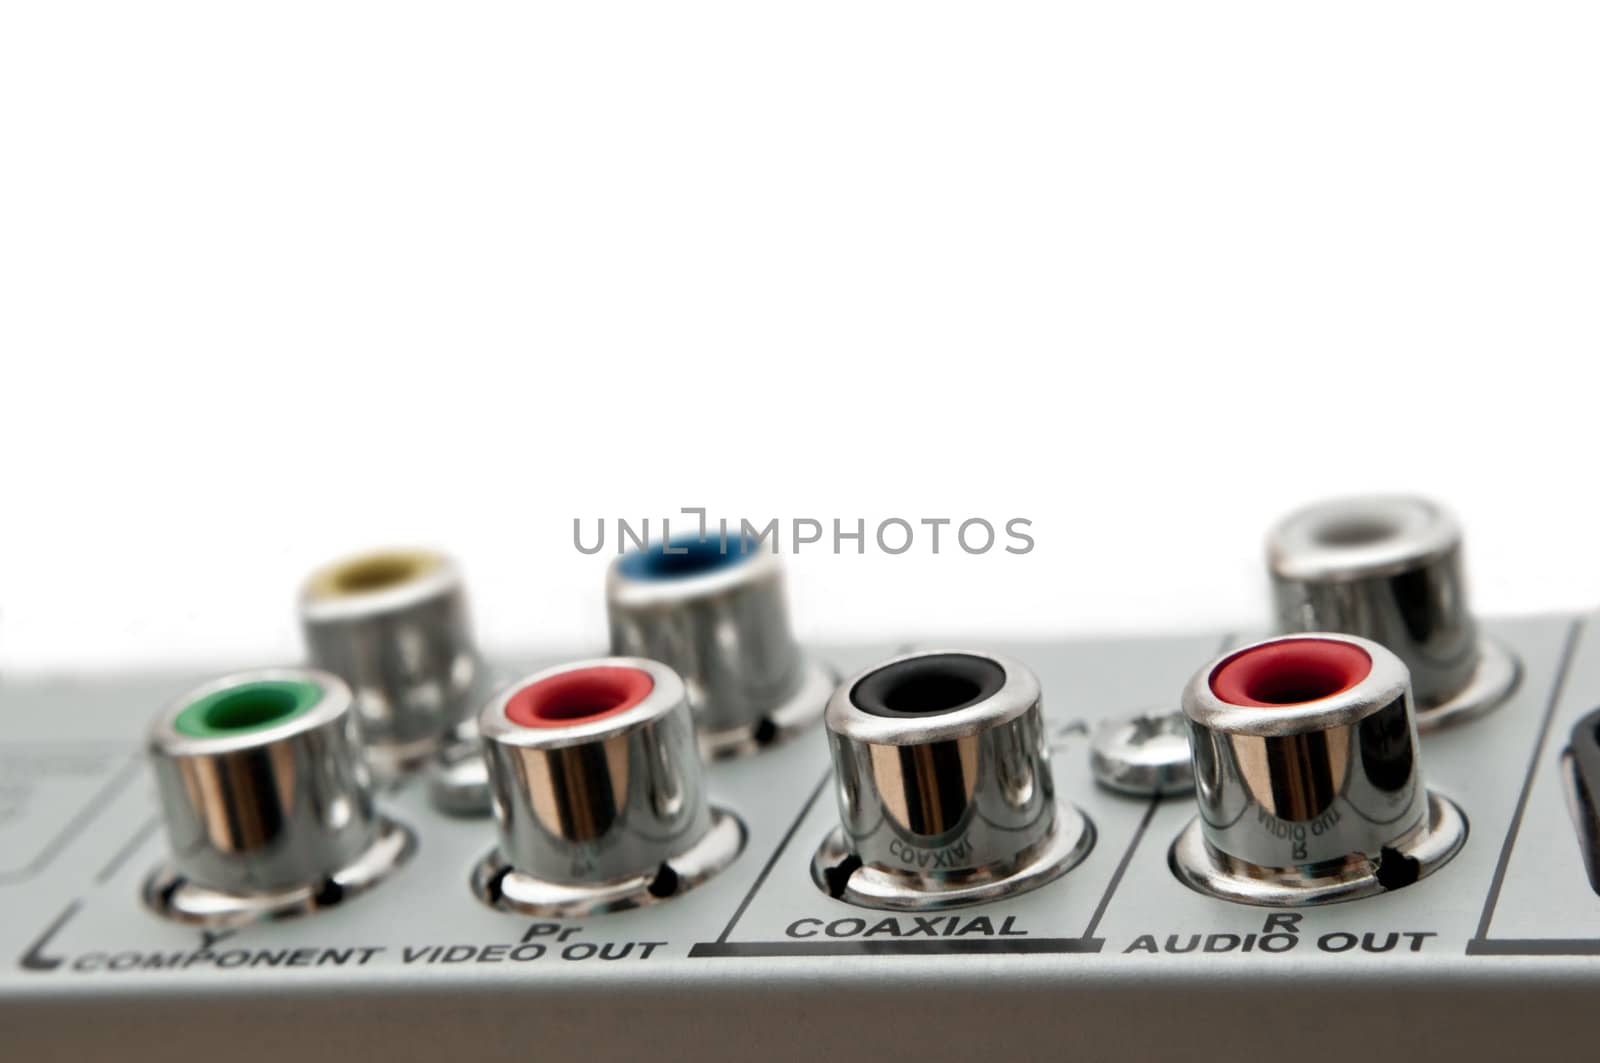 Close up capturing audio visual sockets on the rear of an electrical device. White background.